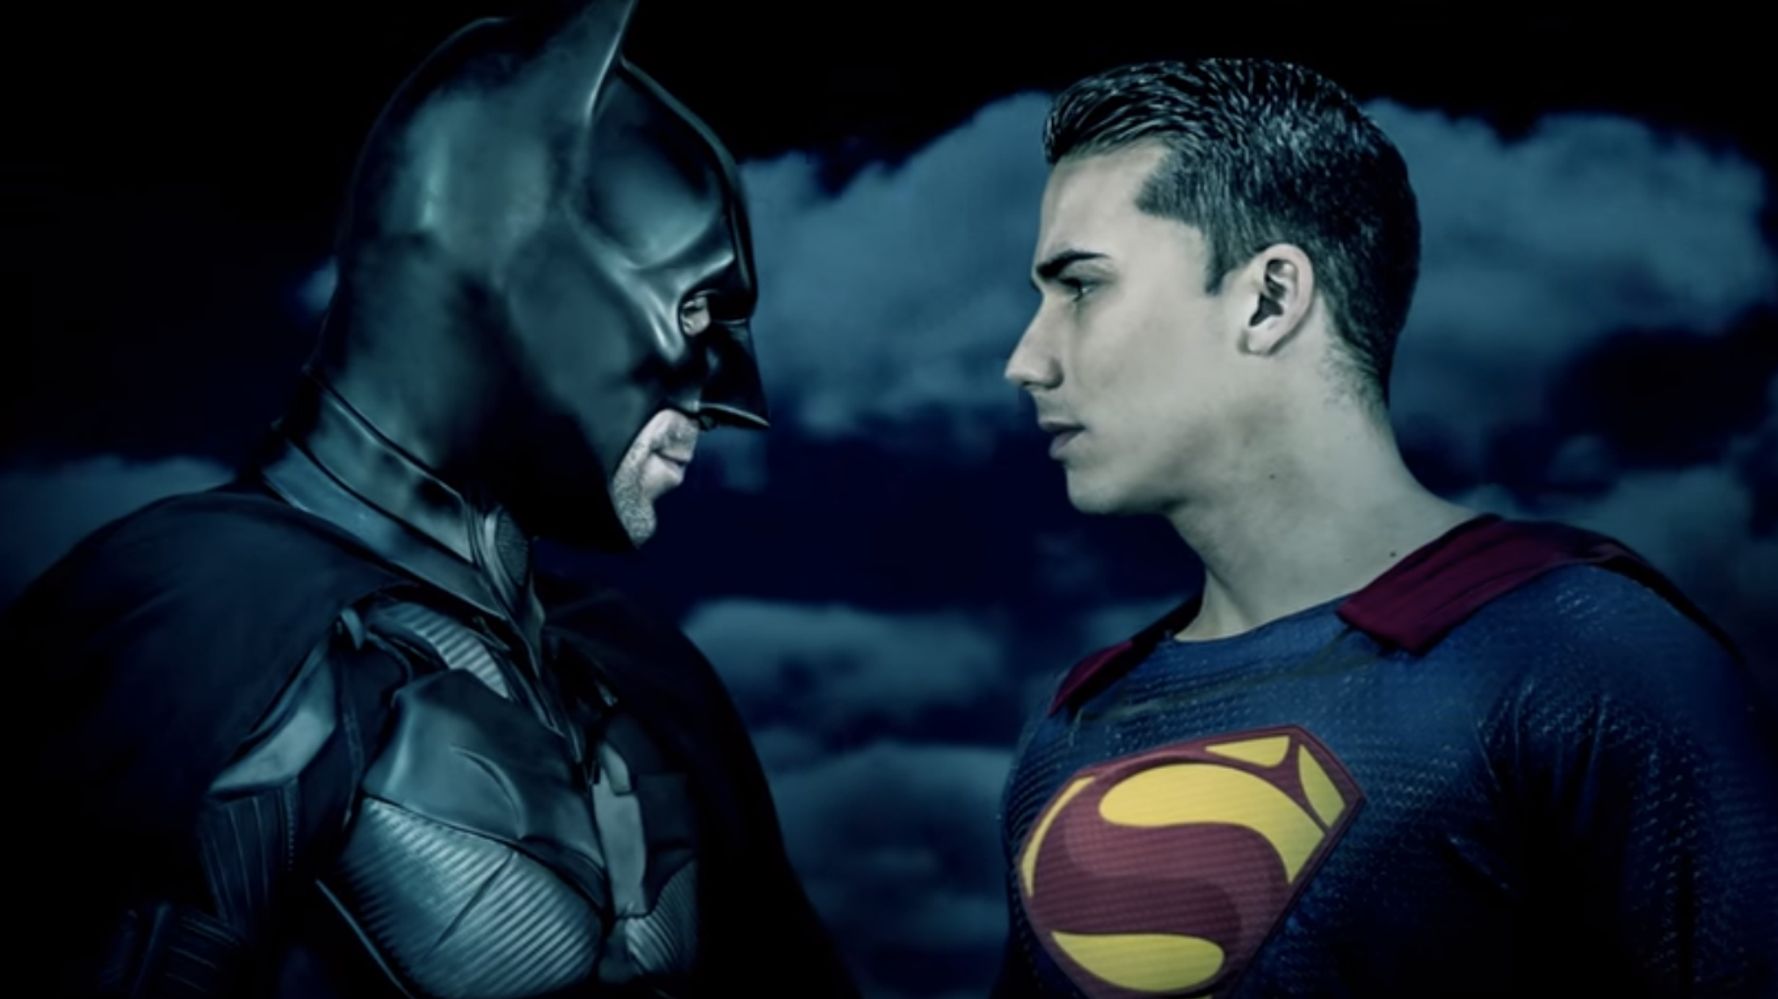 Hot Gay Batman Porn - Here's The 'Batman Vs Superman' Gay Porn Parody You Never Knew You Needed |  HuffPost Voices